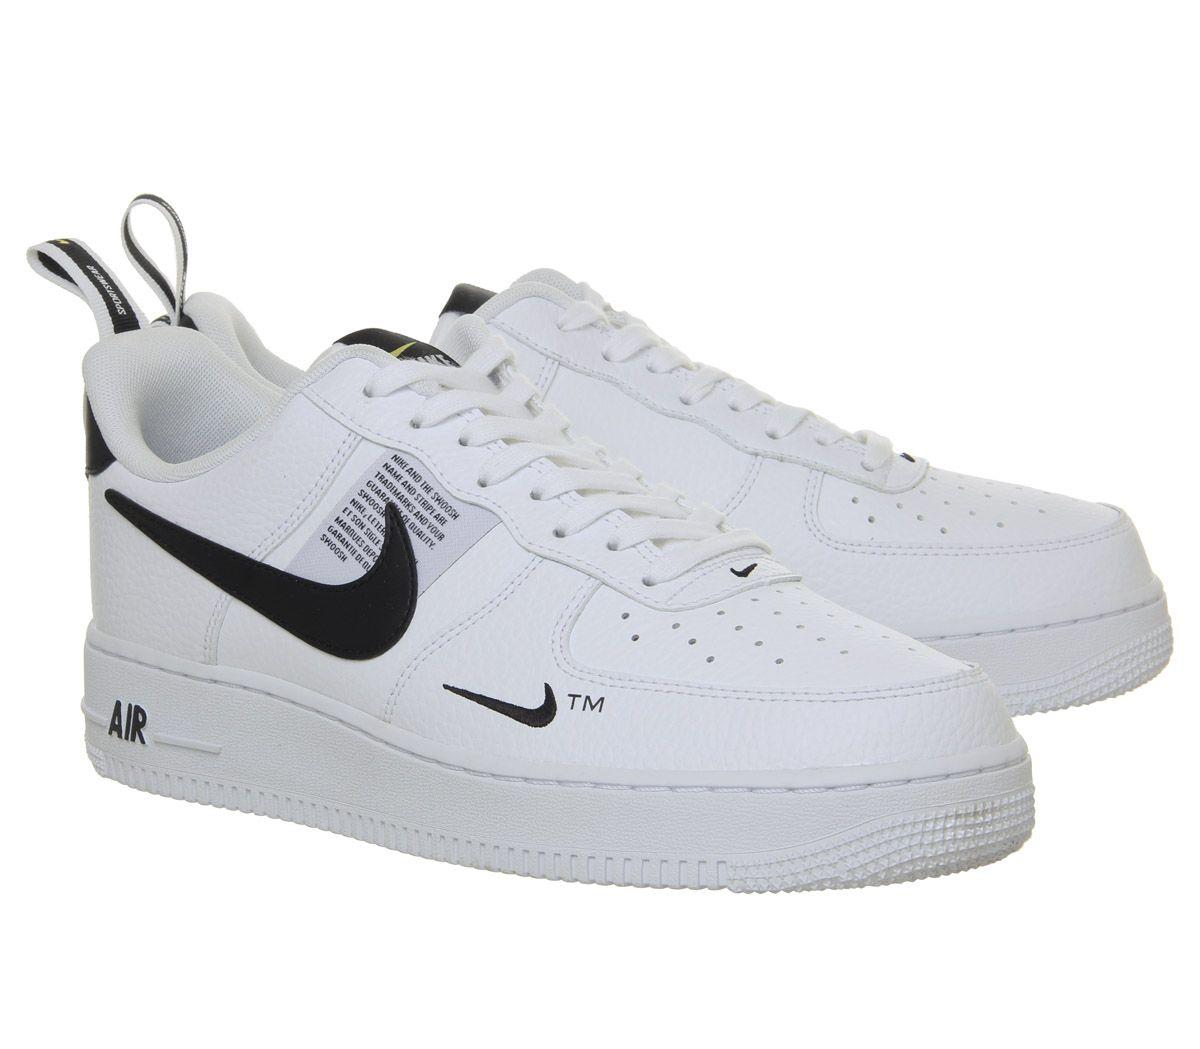 air force 1 utility trainers black white black tour yellow